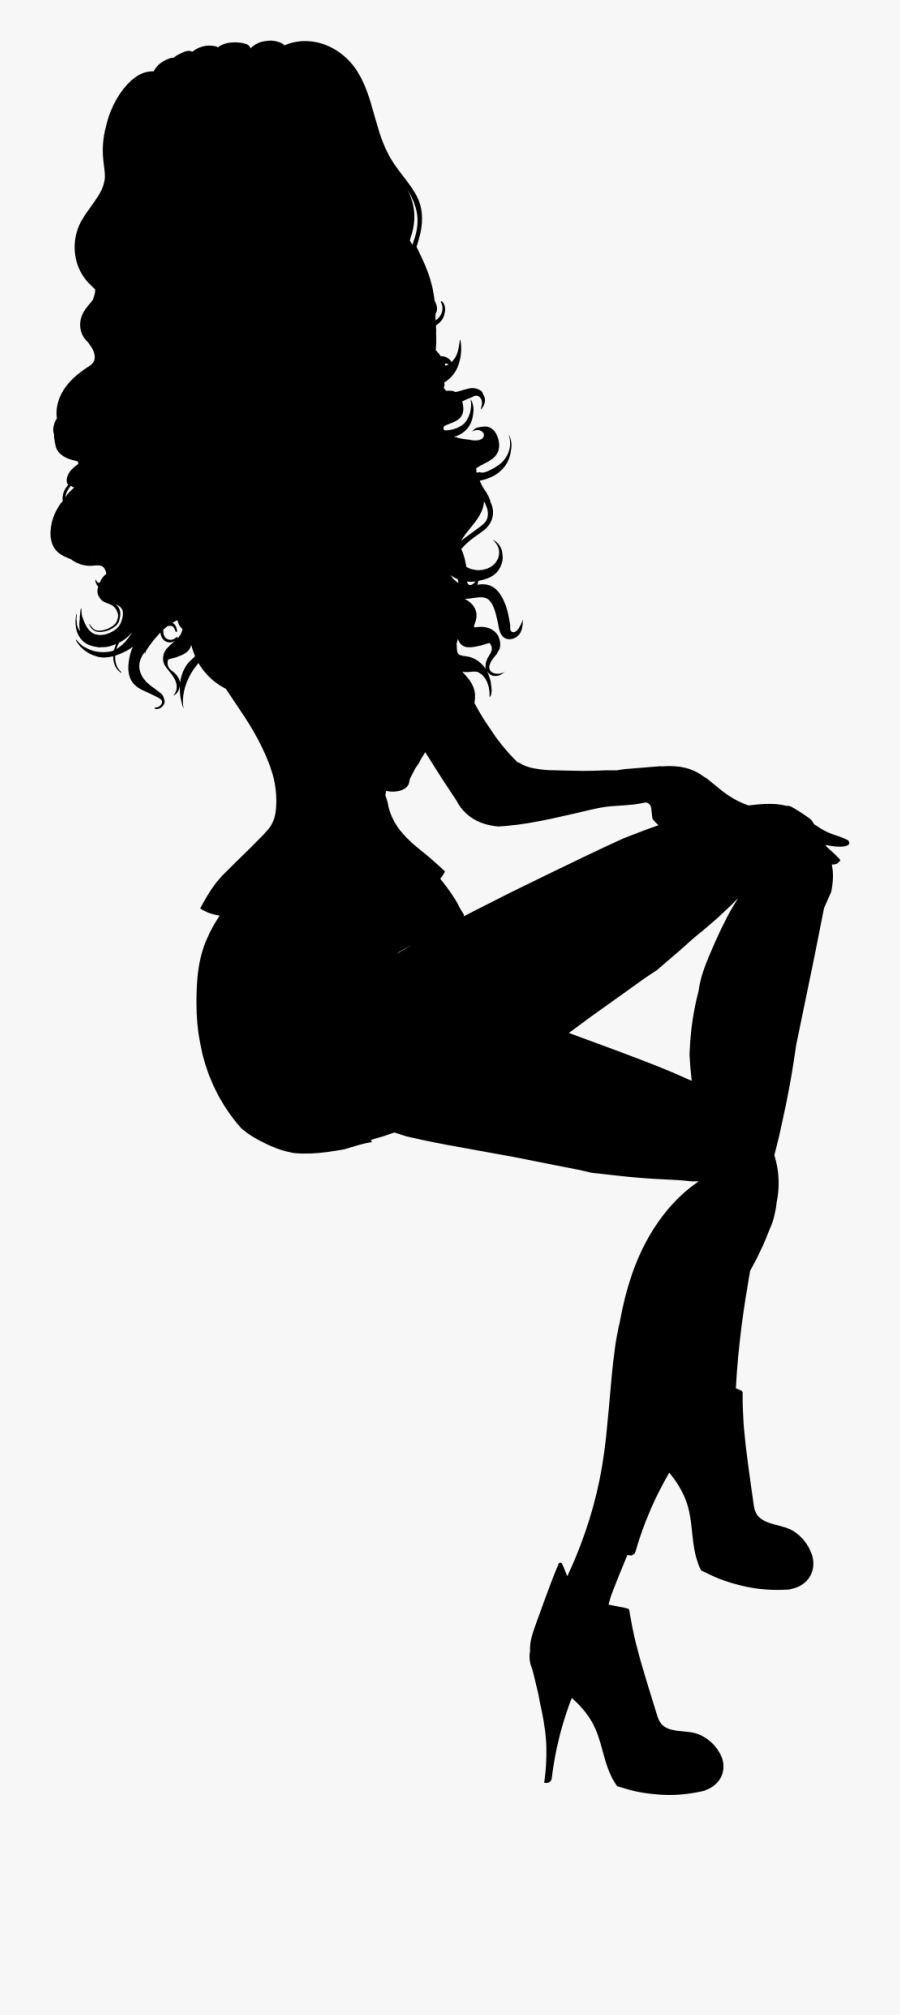 Clip Art Freeuse Stock Sitting In A Chair Clipart - Woman Sitting Clip Art, Transparent Clipart